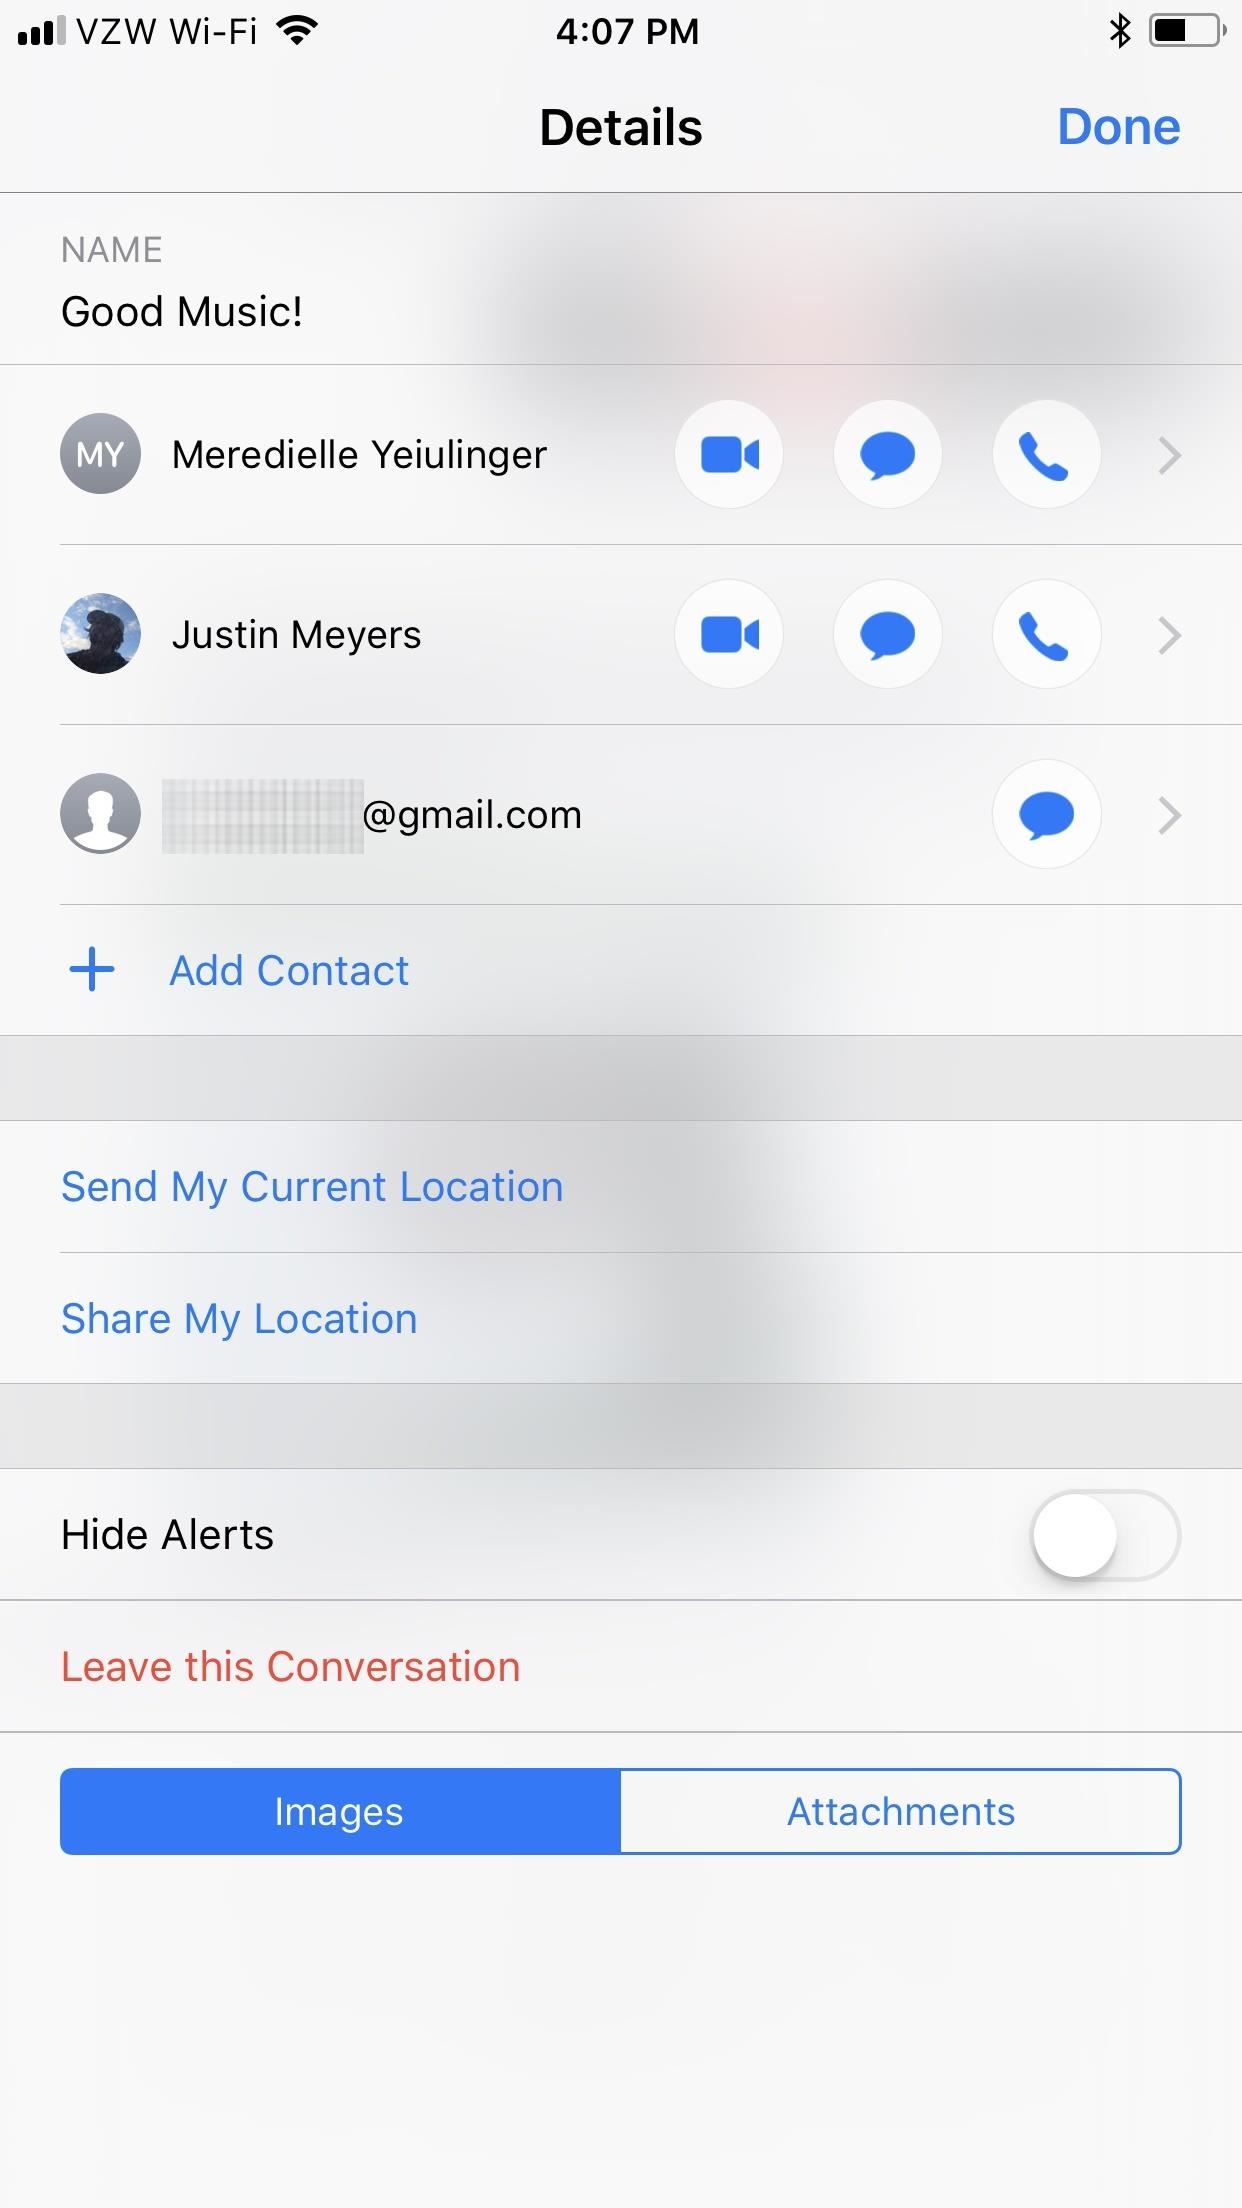 Messages 101: How to Leave Group Conversations on Your iPhone